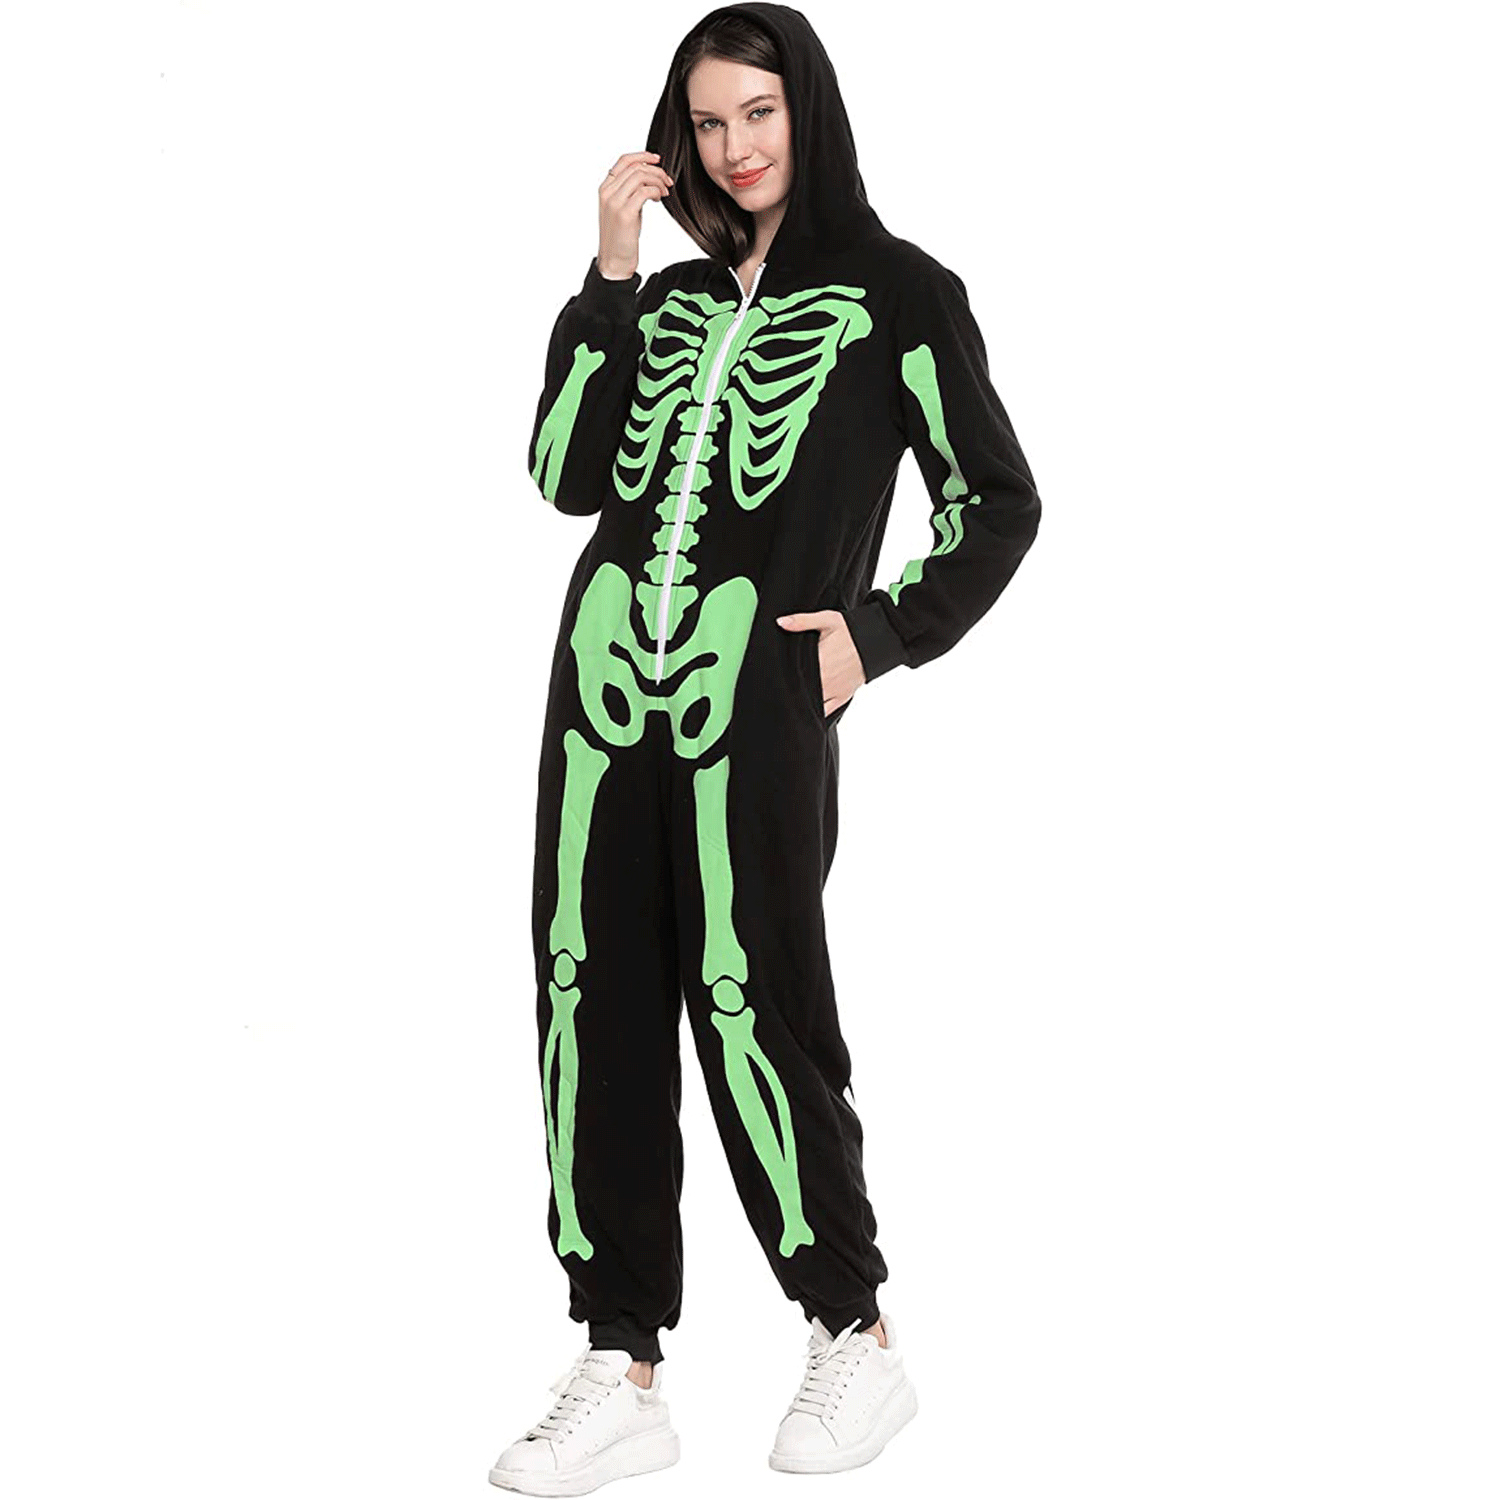 You are currently viewing 2022 Best women’s pajamas for Halloween